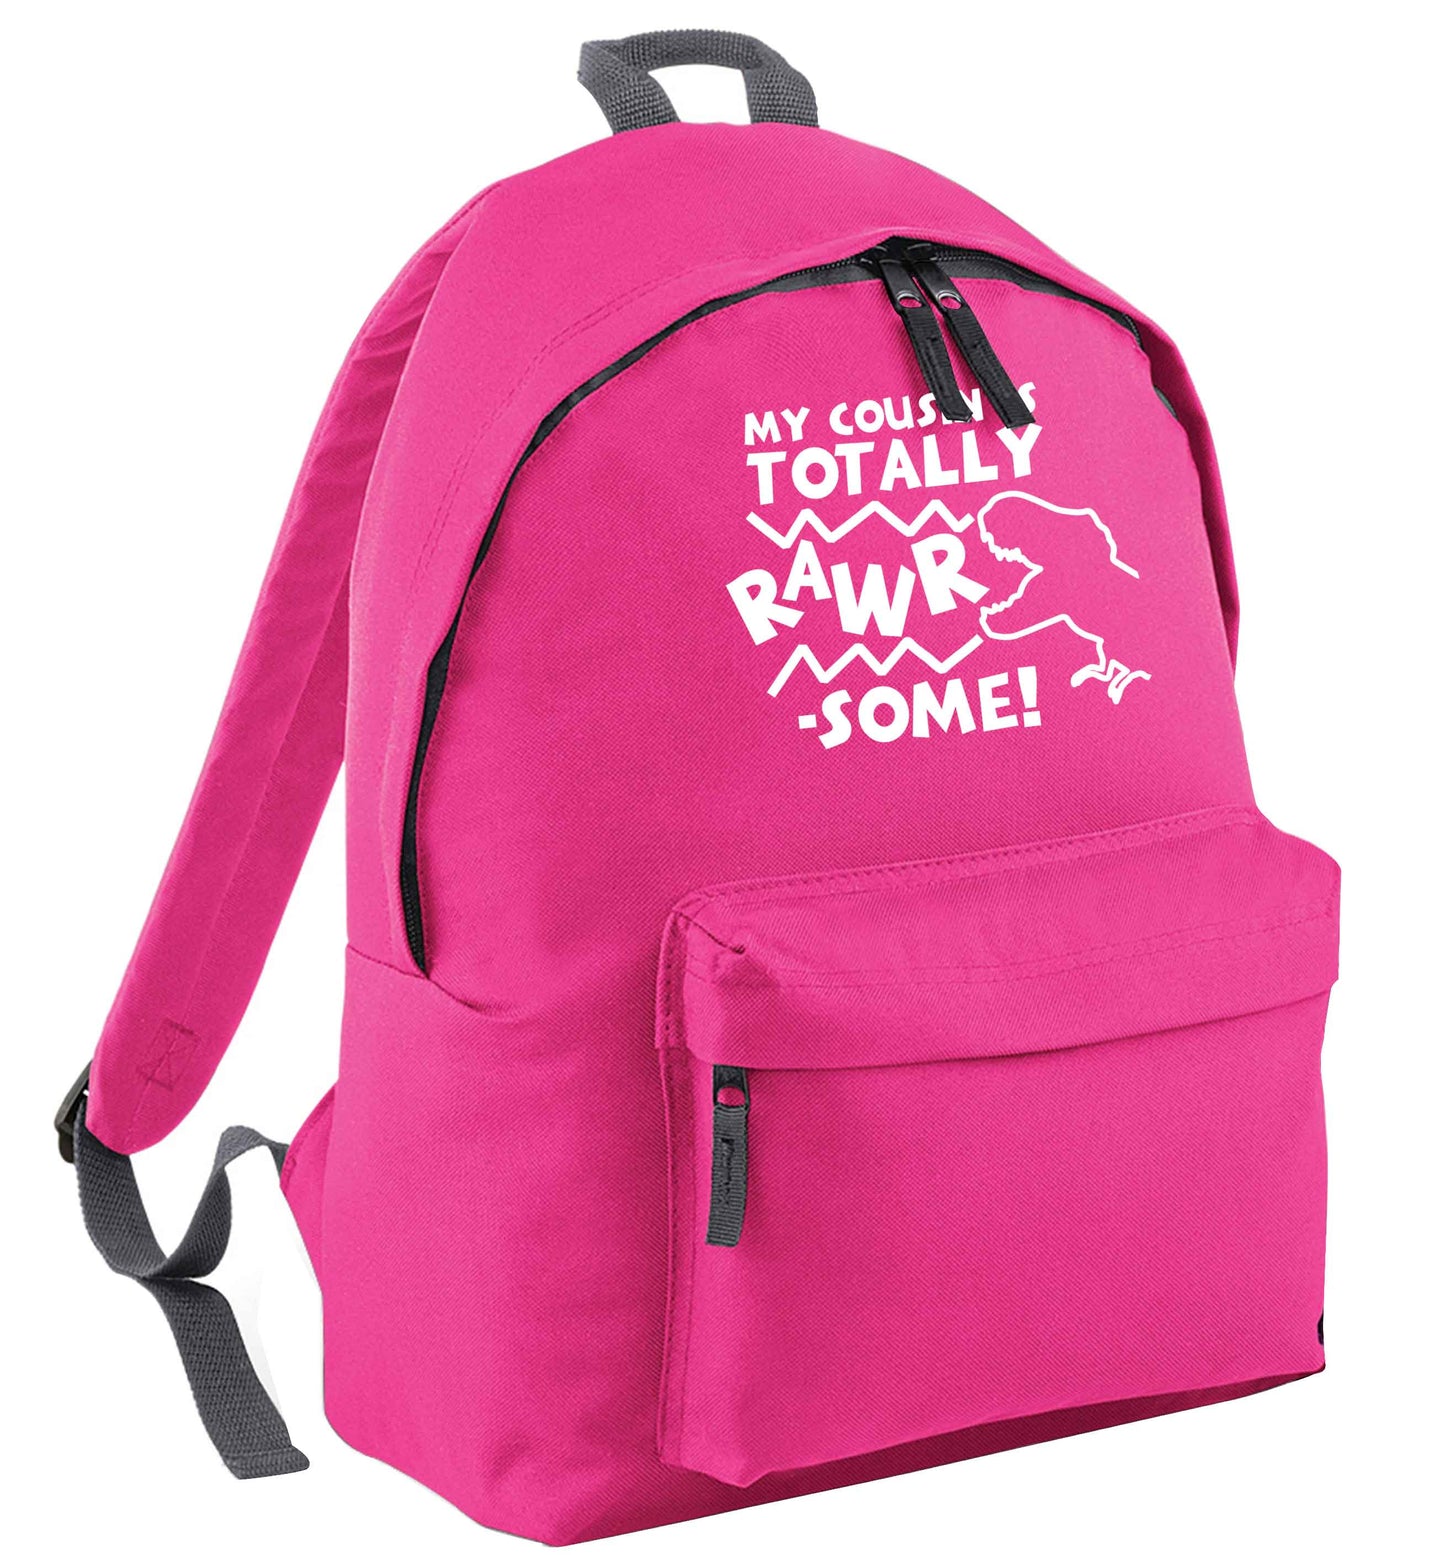 My cousin is totally rawrsome pink childrens backpack